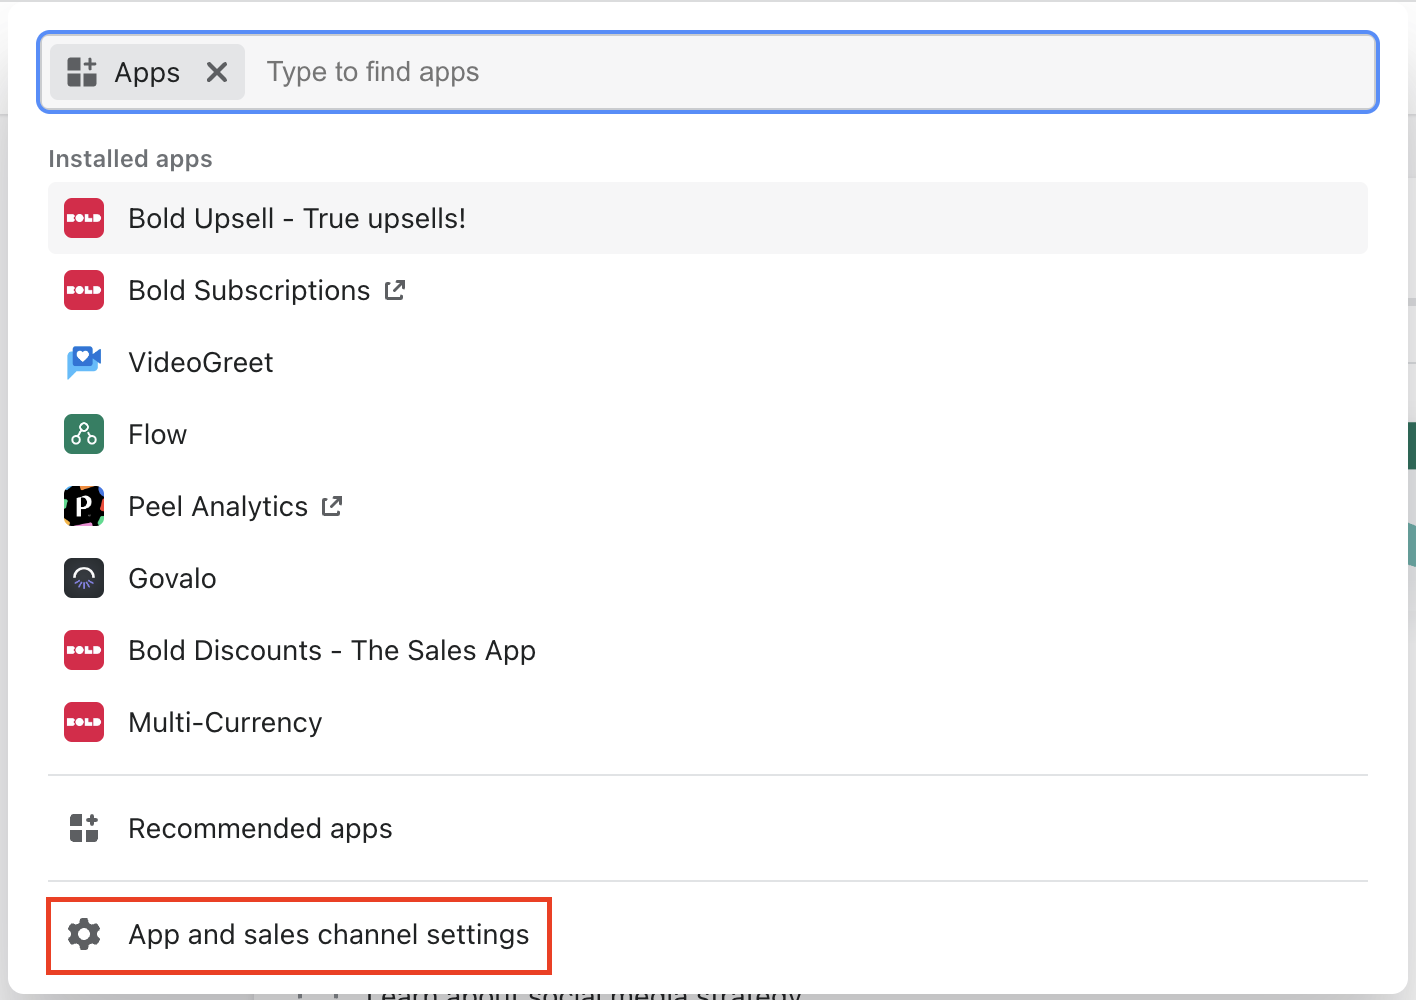 Apps and sales channel settings